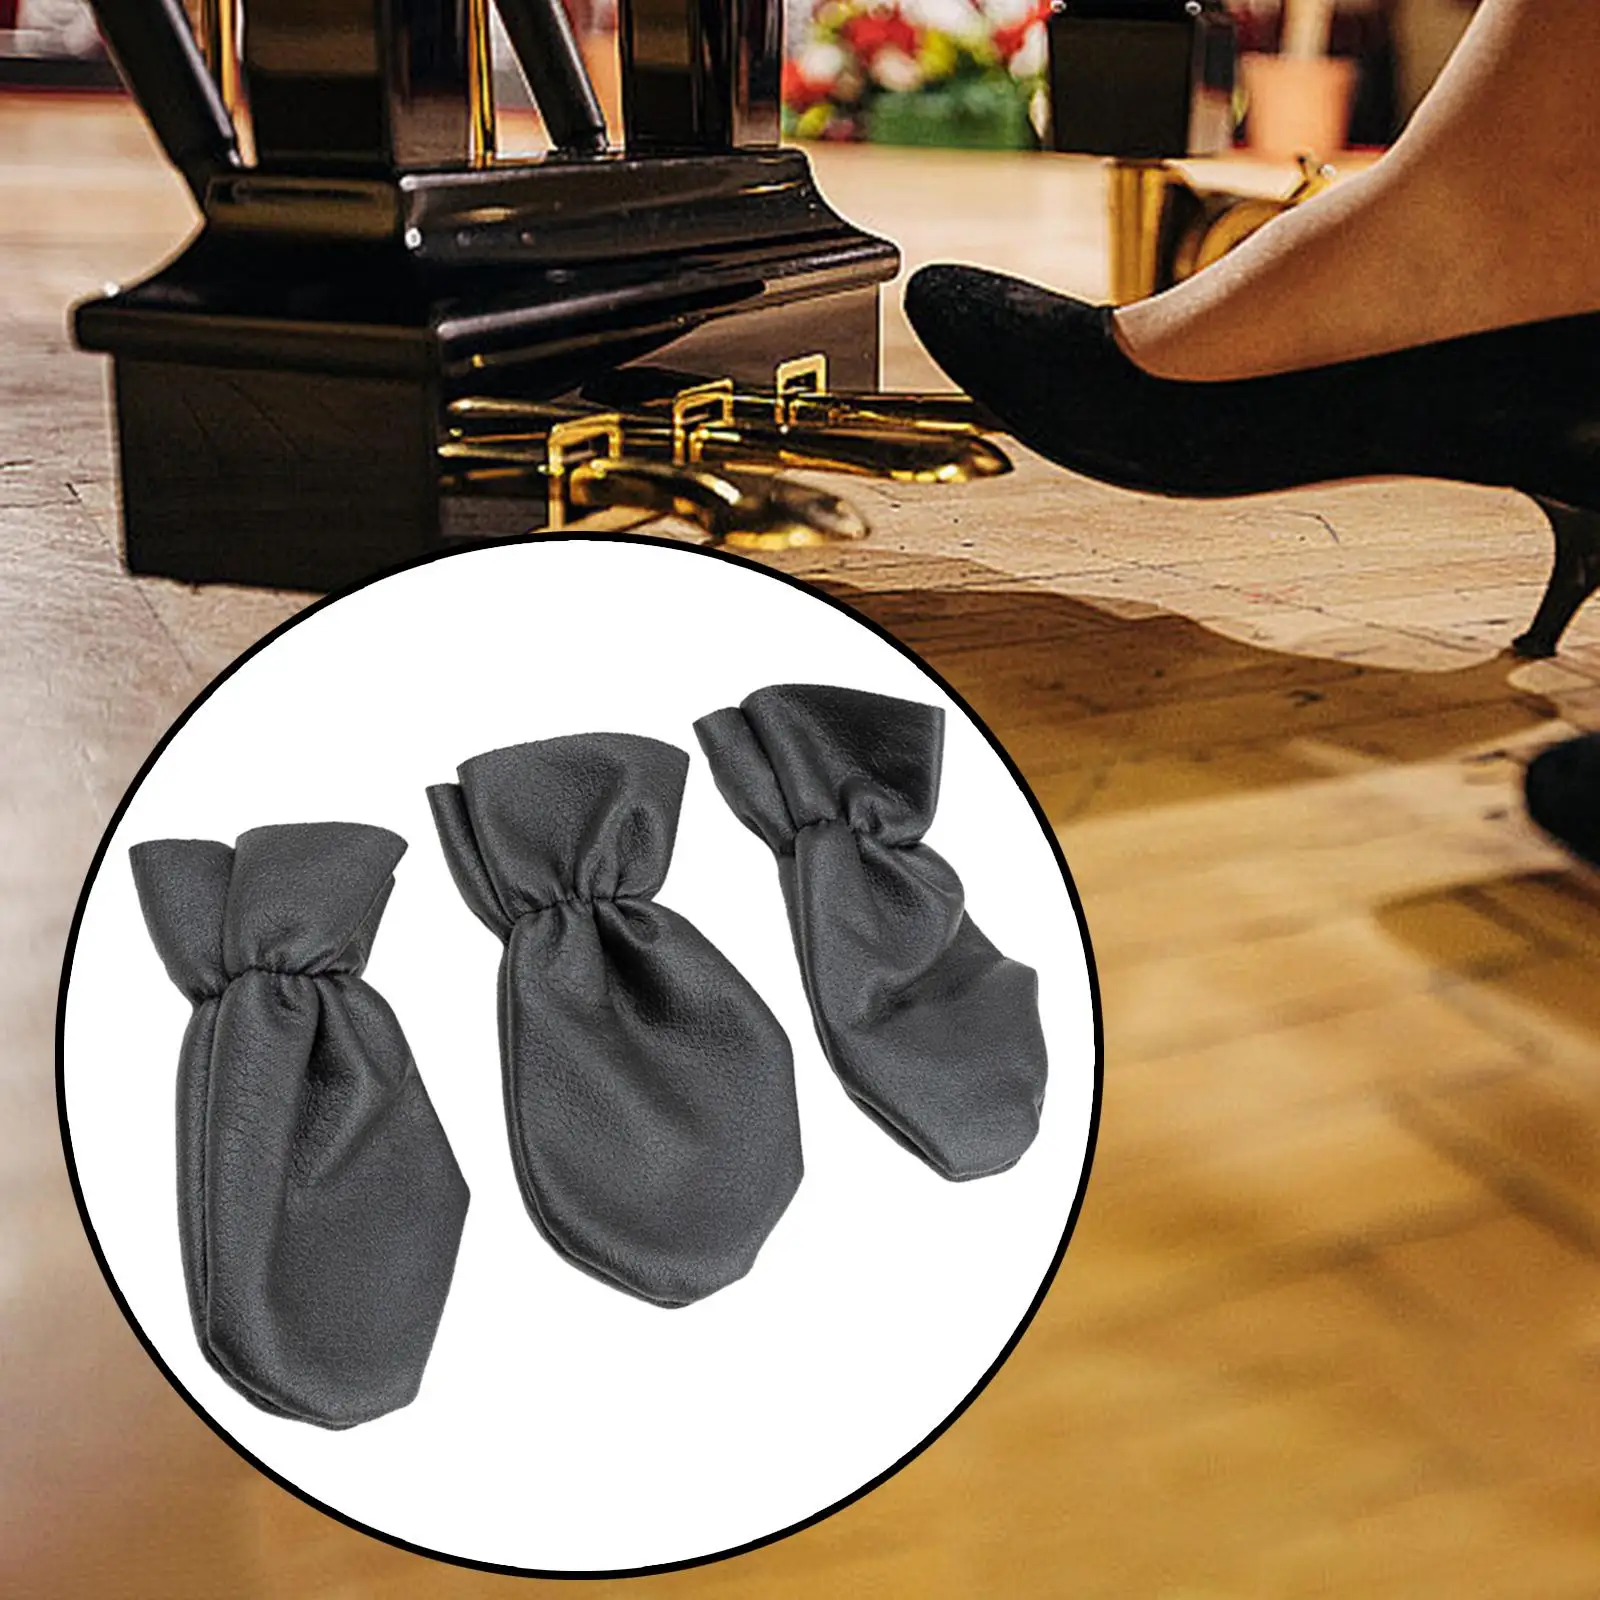 3Pcs Piano Pedal Dust Cover Anti Slip Waterproof Musical Instrument Piano Protection Universal Protective Case for Grand Piano